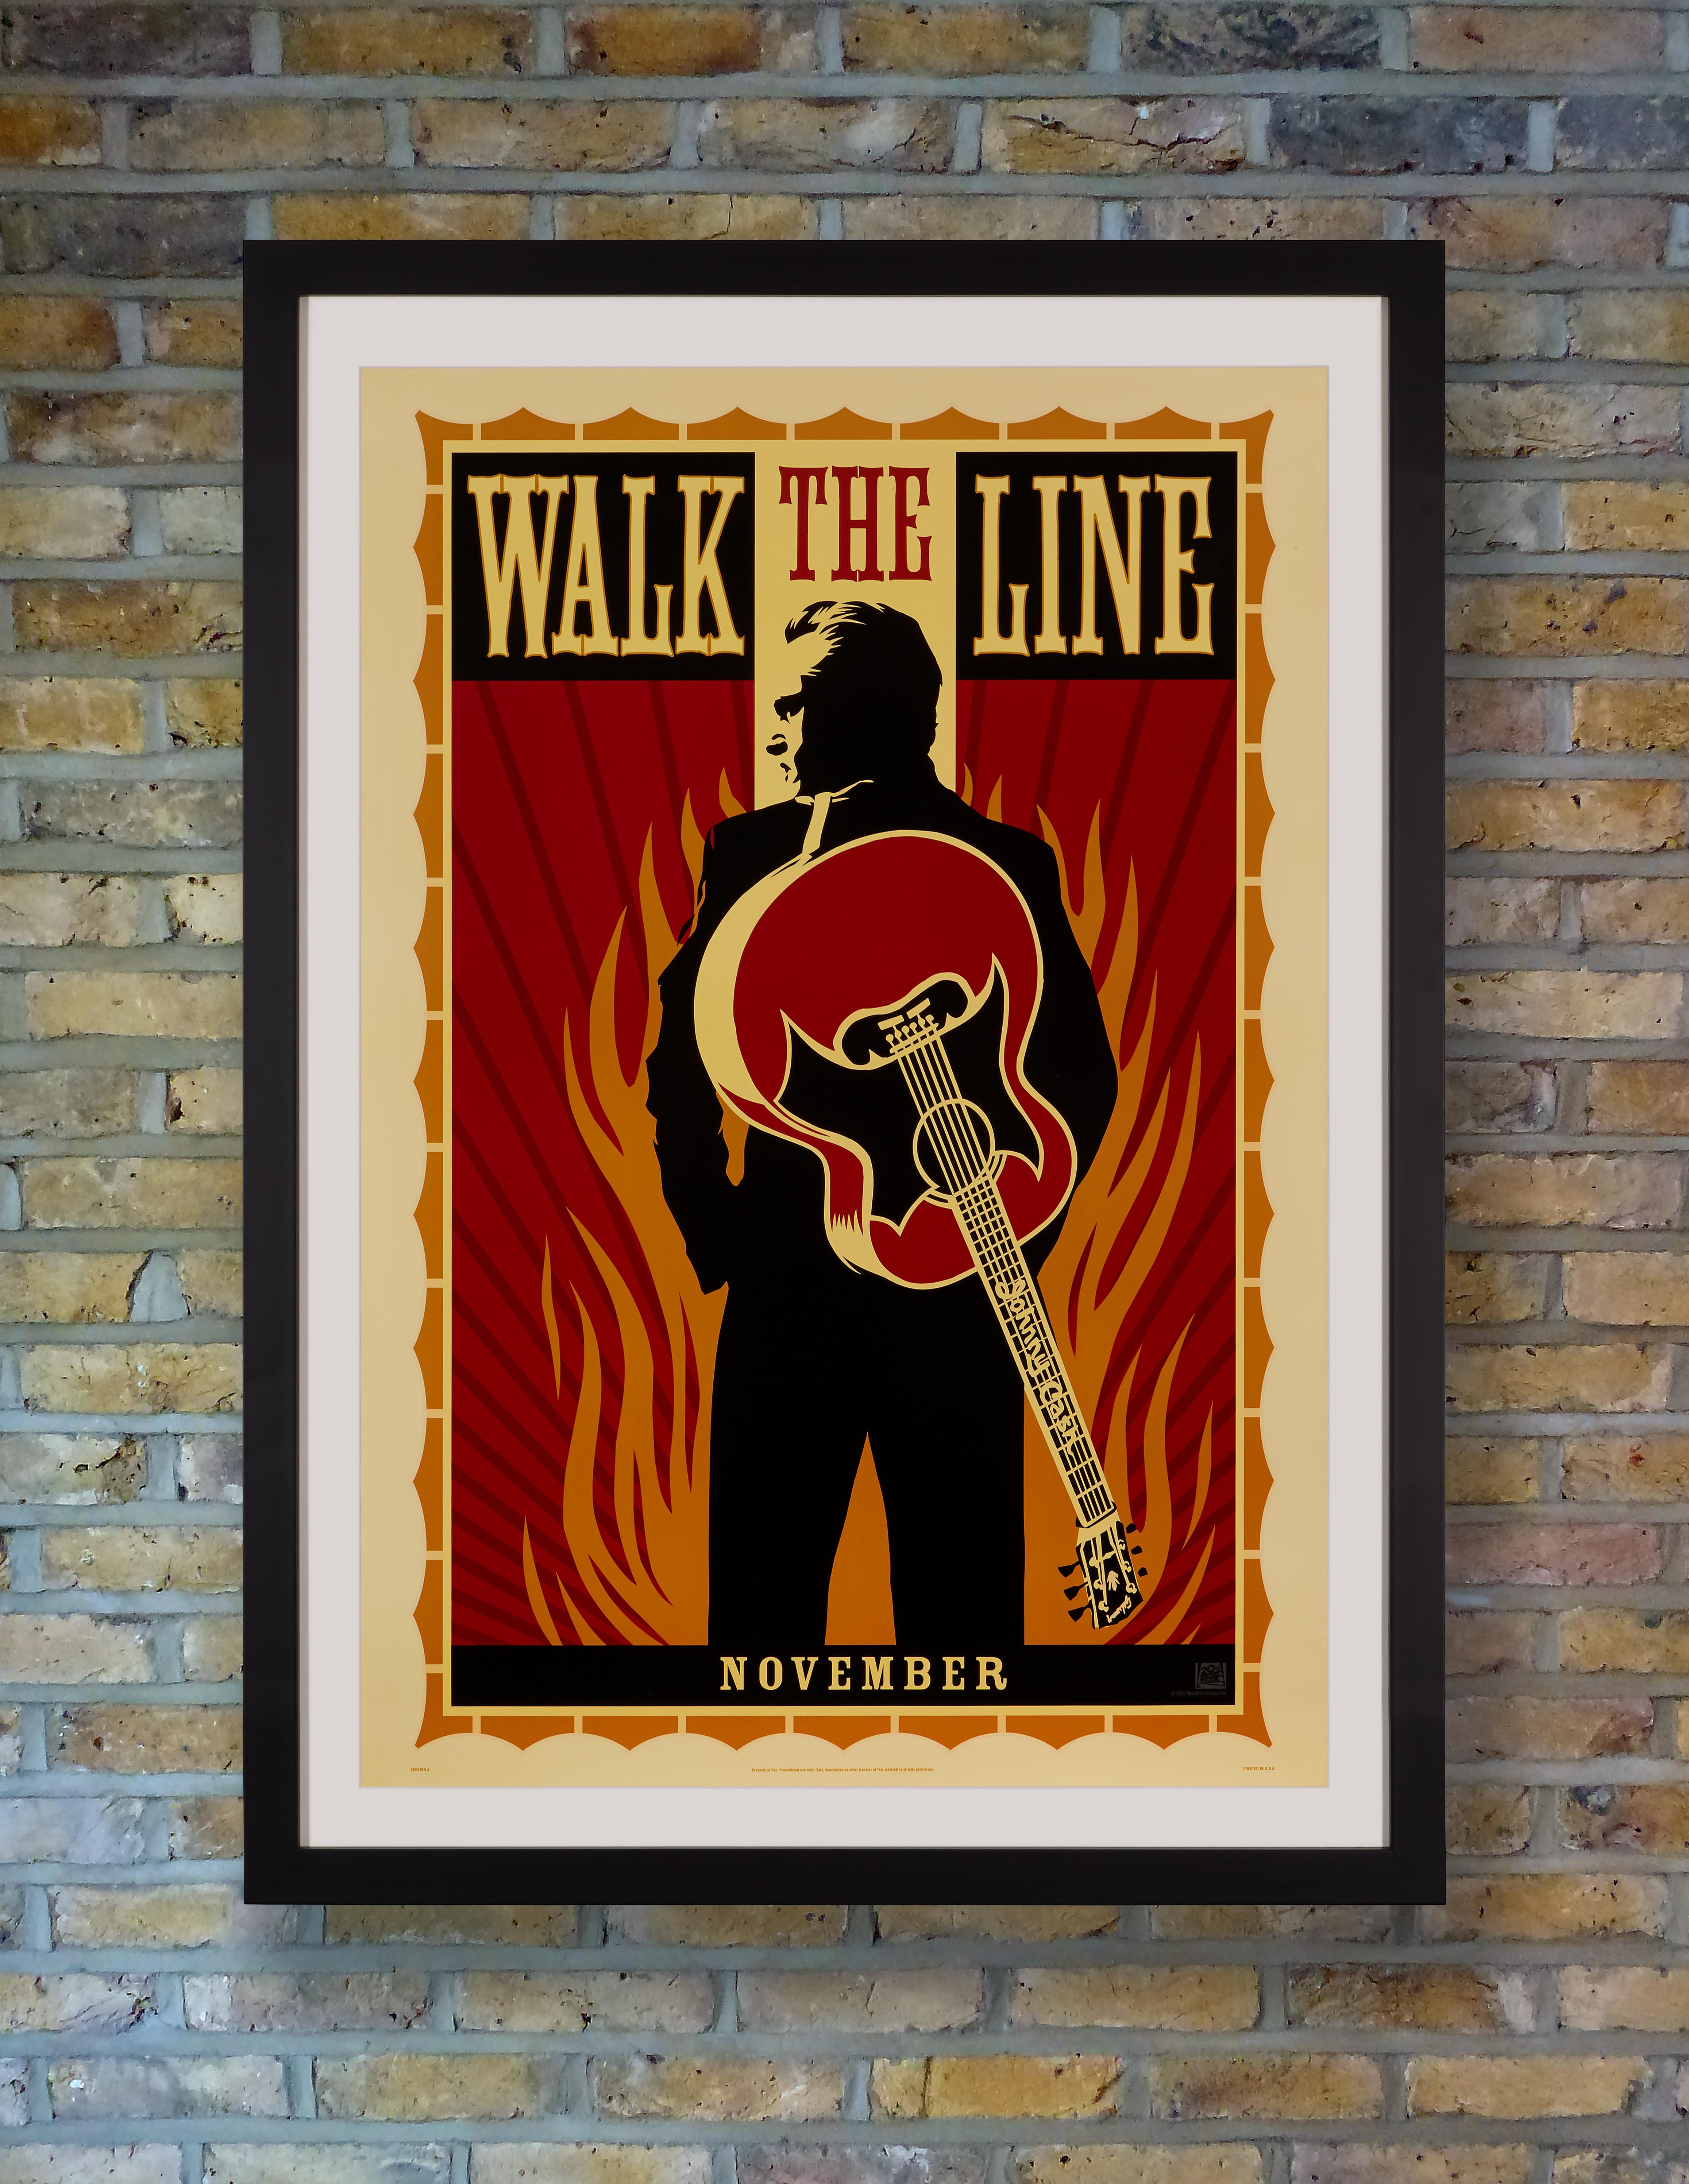 One of the finest movie posters to be produced in recent years, street artist Shepard Fairey's dazzling design for the teaser Campaign of 2005 Johnny Cash biopic 'Walk The Line' is a triumph, depicting Joaquin Phoenix as the rebellious country music